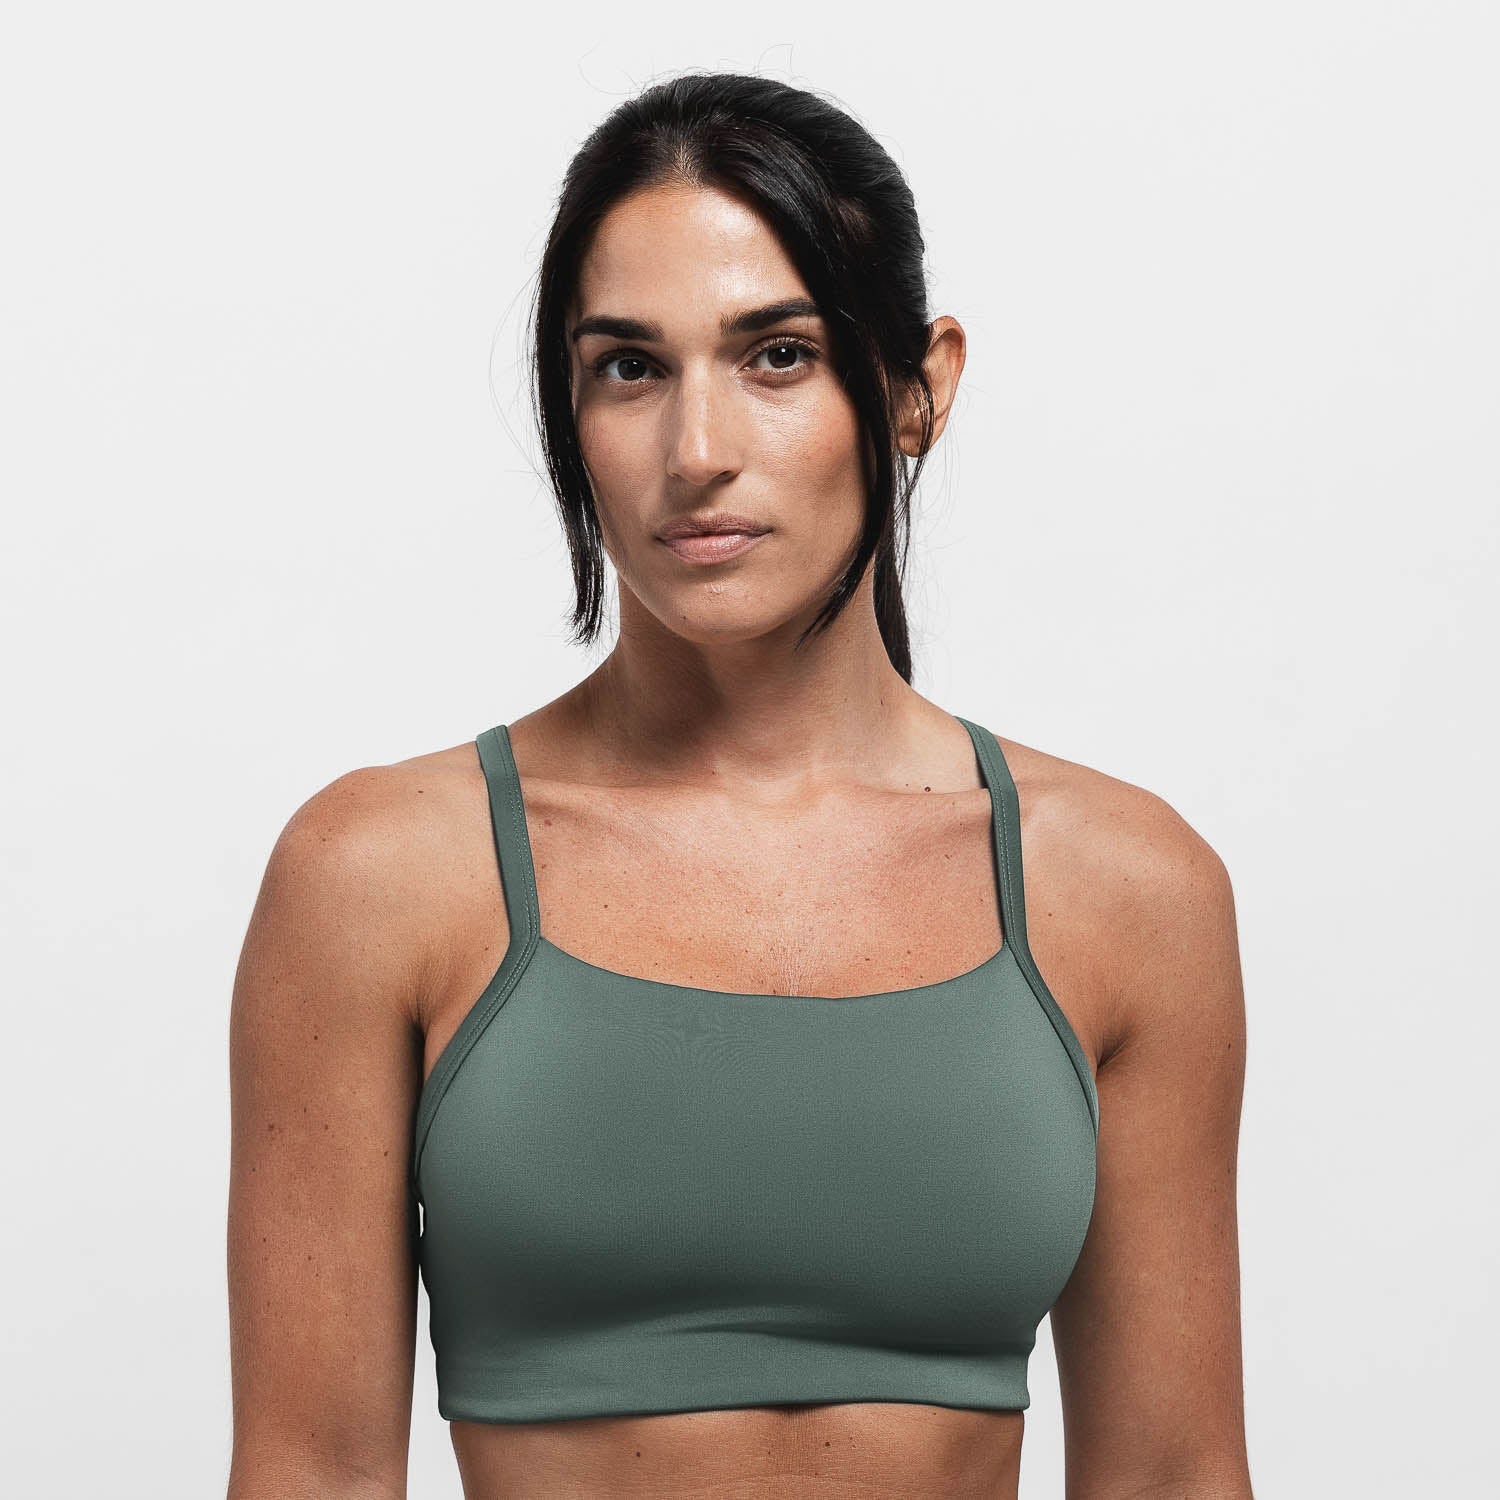 ASYOU knitted cross front bra top in green - part of a set